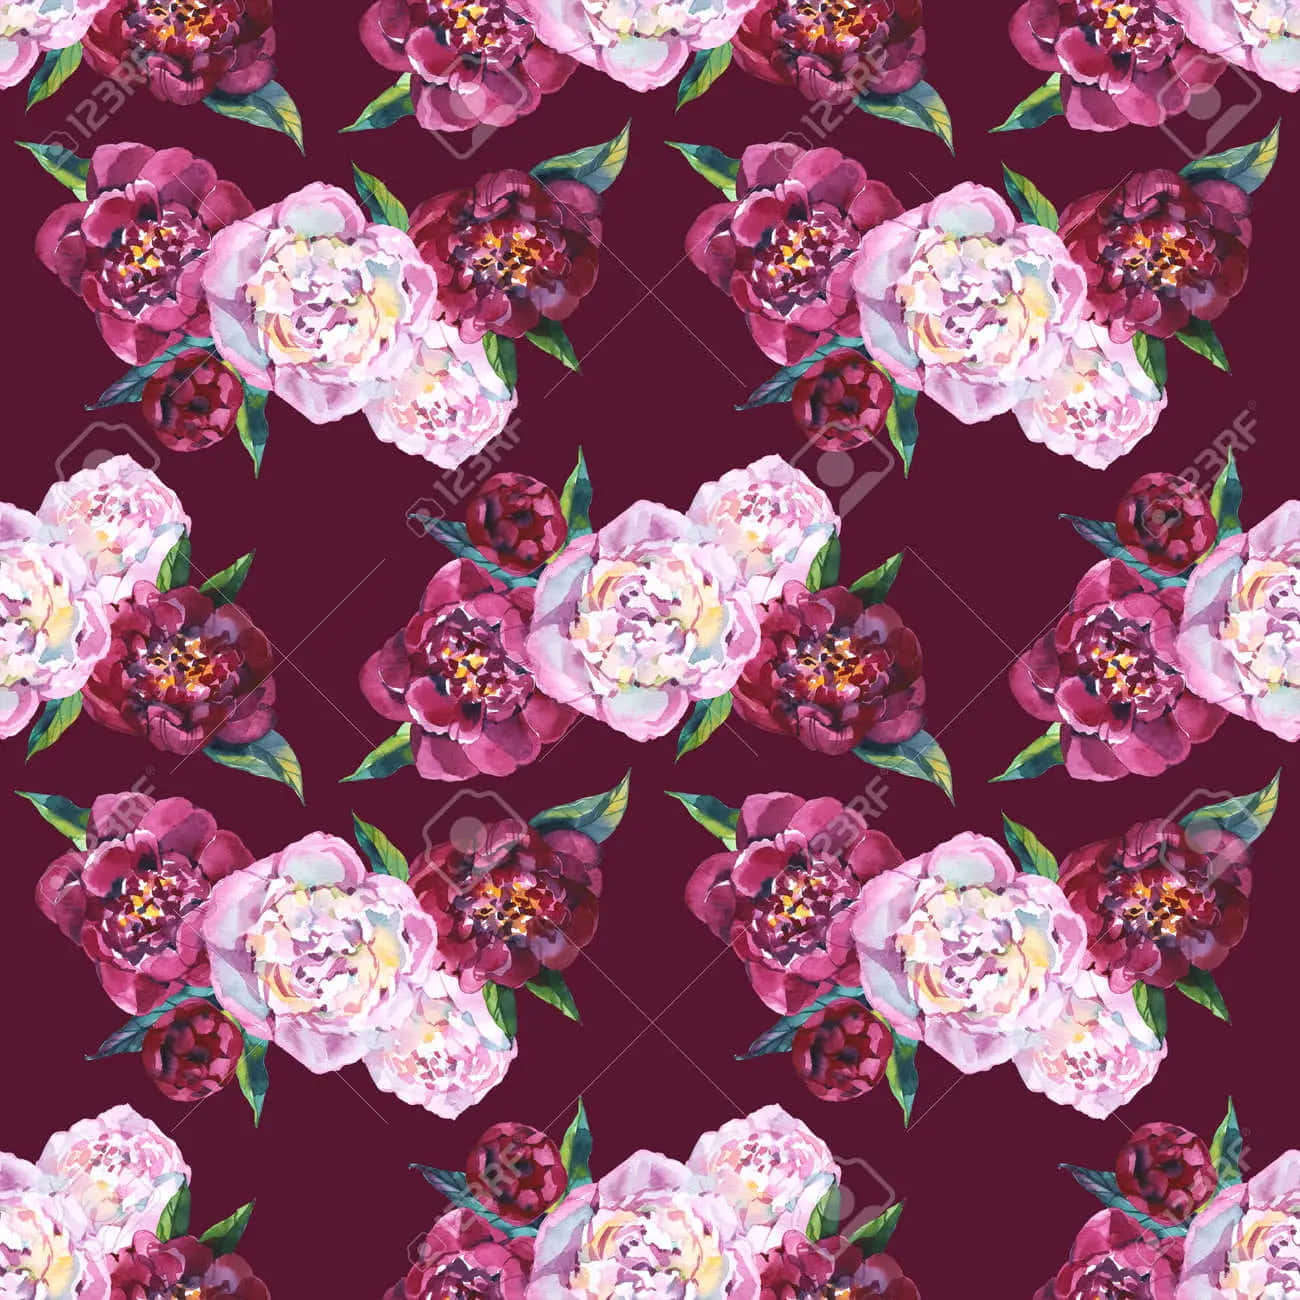 Seamless Pattern With Pink And White Flowers On A Maroon Background Wallpaper